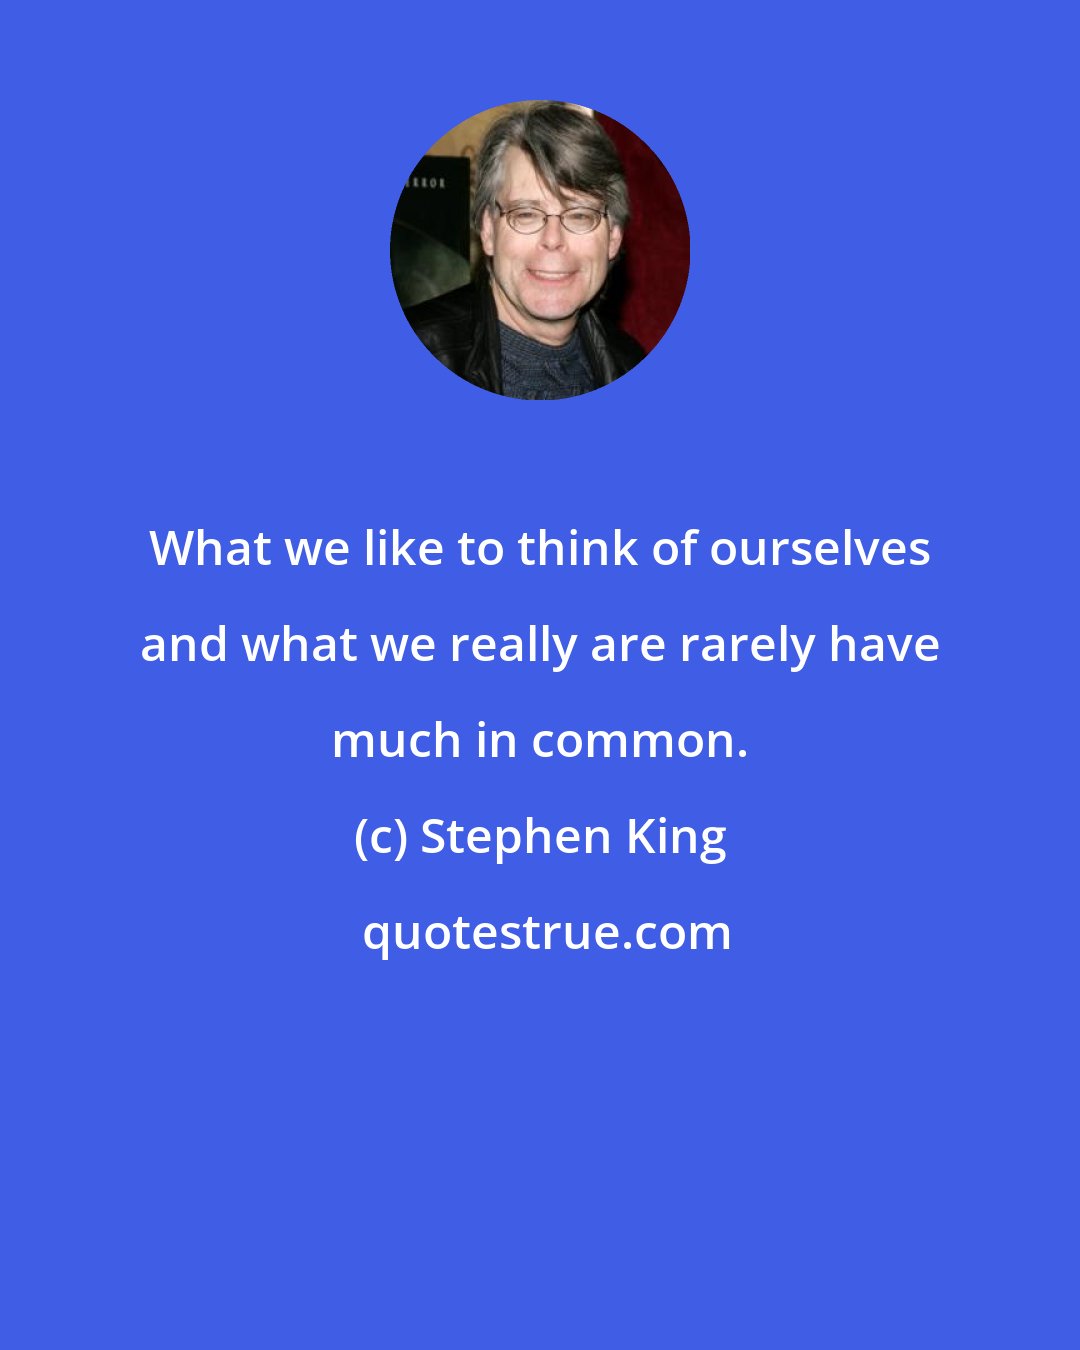 Stephen King: What we like to think of ourselves and what we really are rarely have much in common.